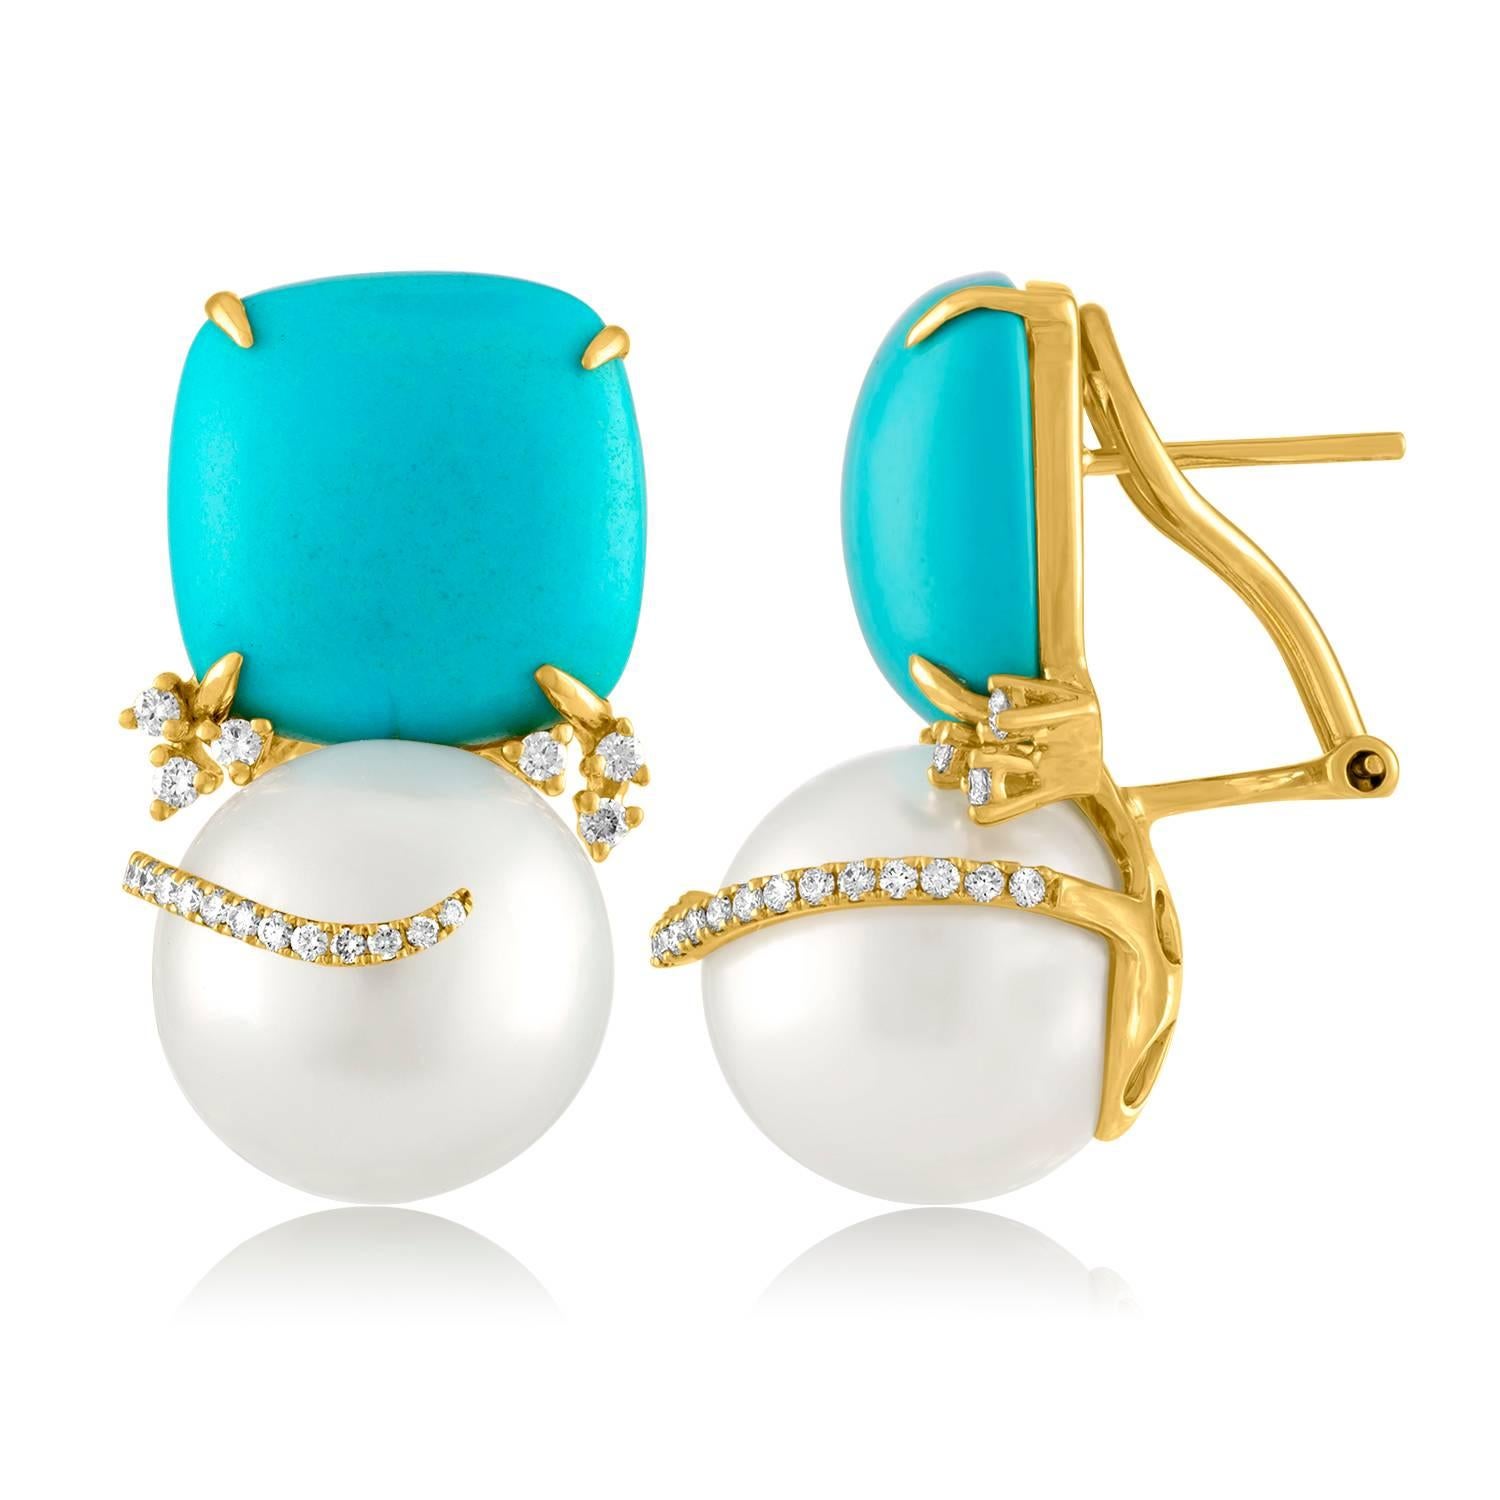 Beautiful & Fun Earrings.
The earrings are 18K Yellow Gold.
There are 0.50 Carats in Diamonds F/G VS.
The South Sea Pearls are 13mm in Diameter.
The earrings measure 1